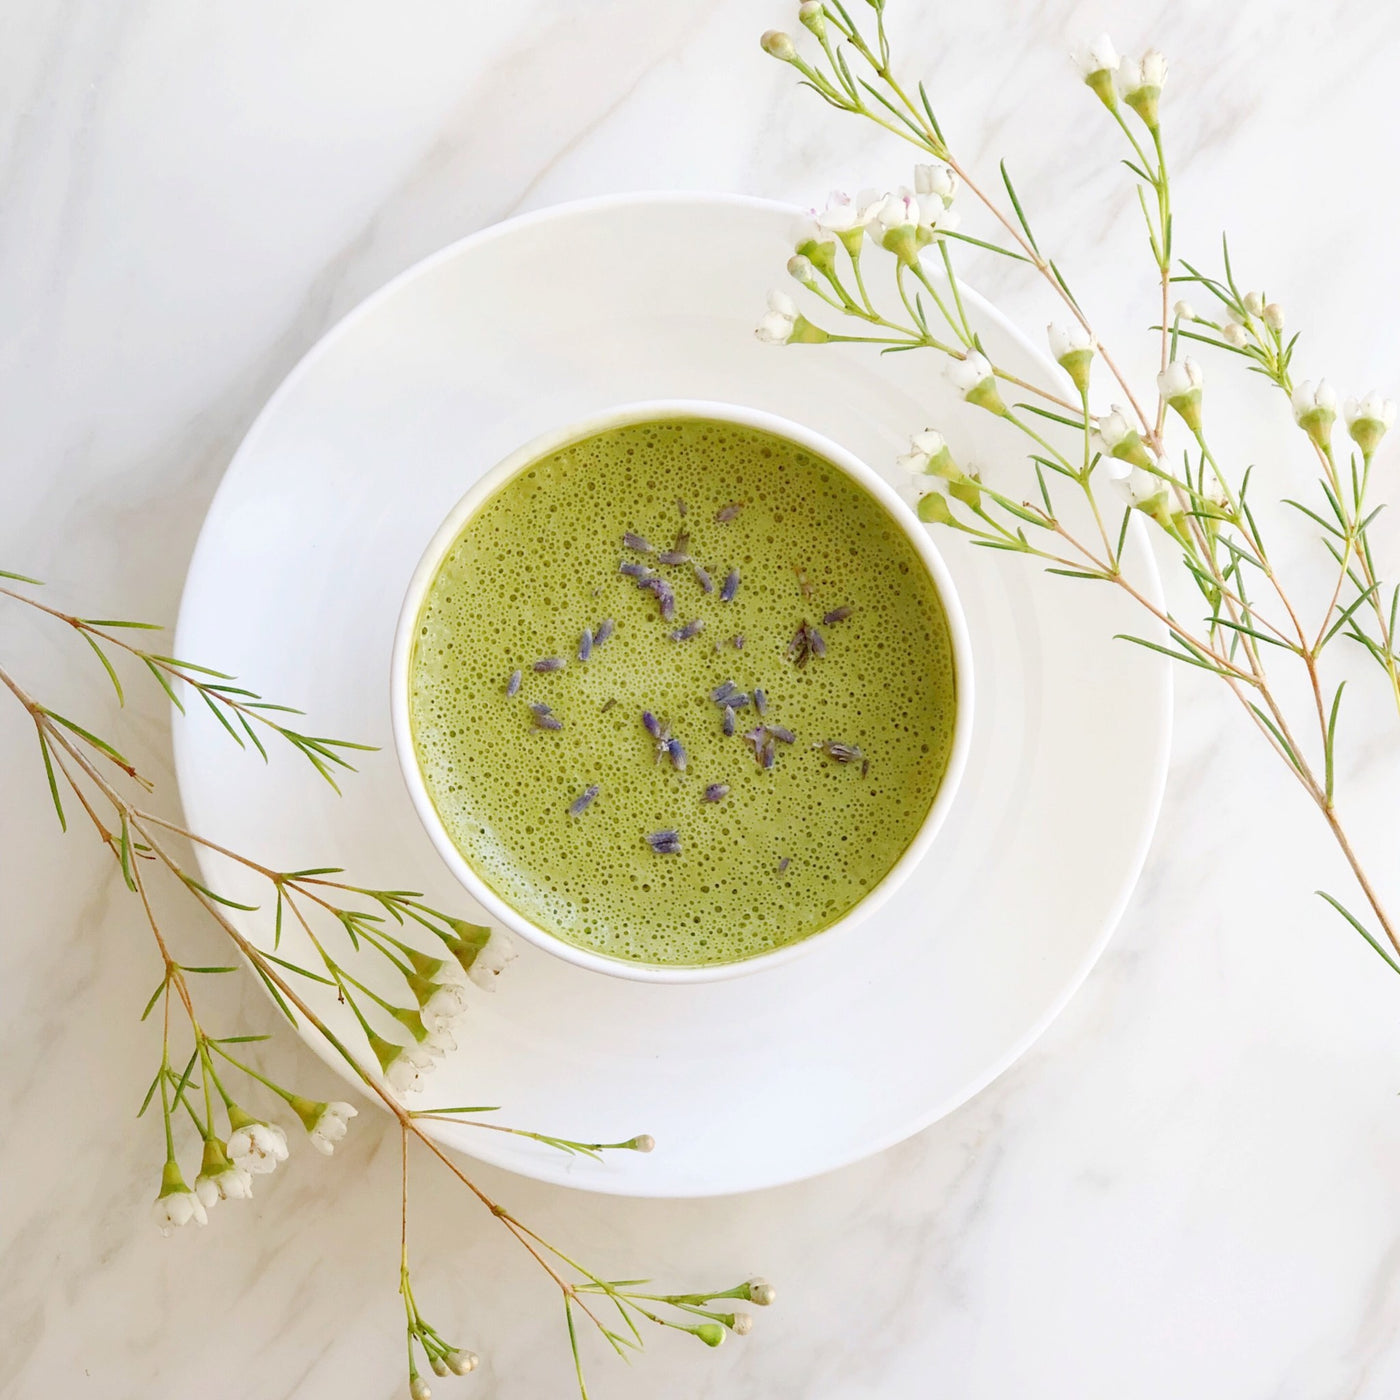 Matcha & Women's Health: 10 Female-Specific Health Benefits of Drinking Matcha Daily